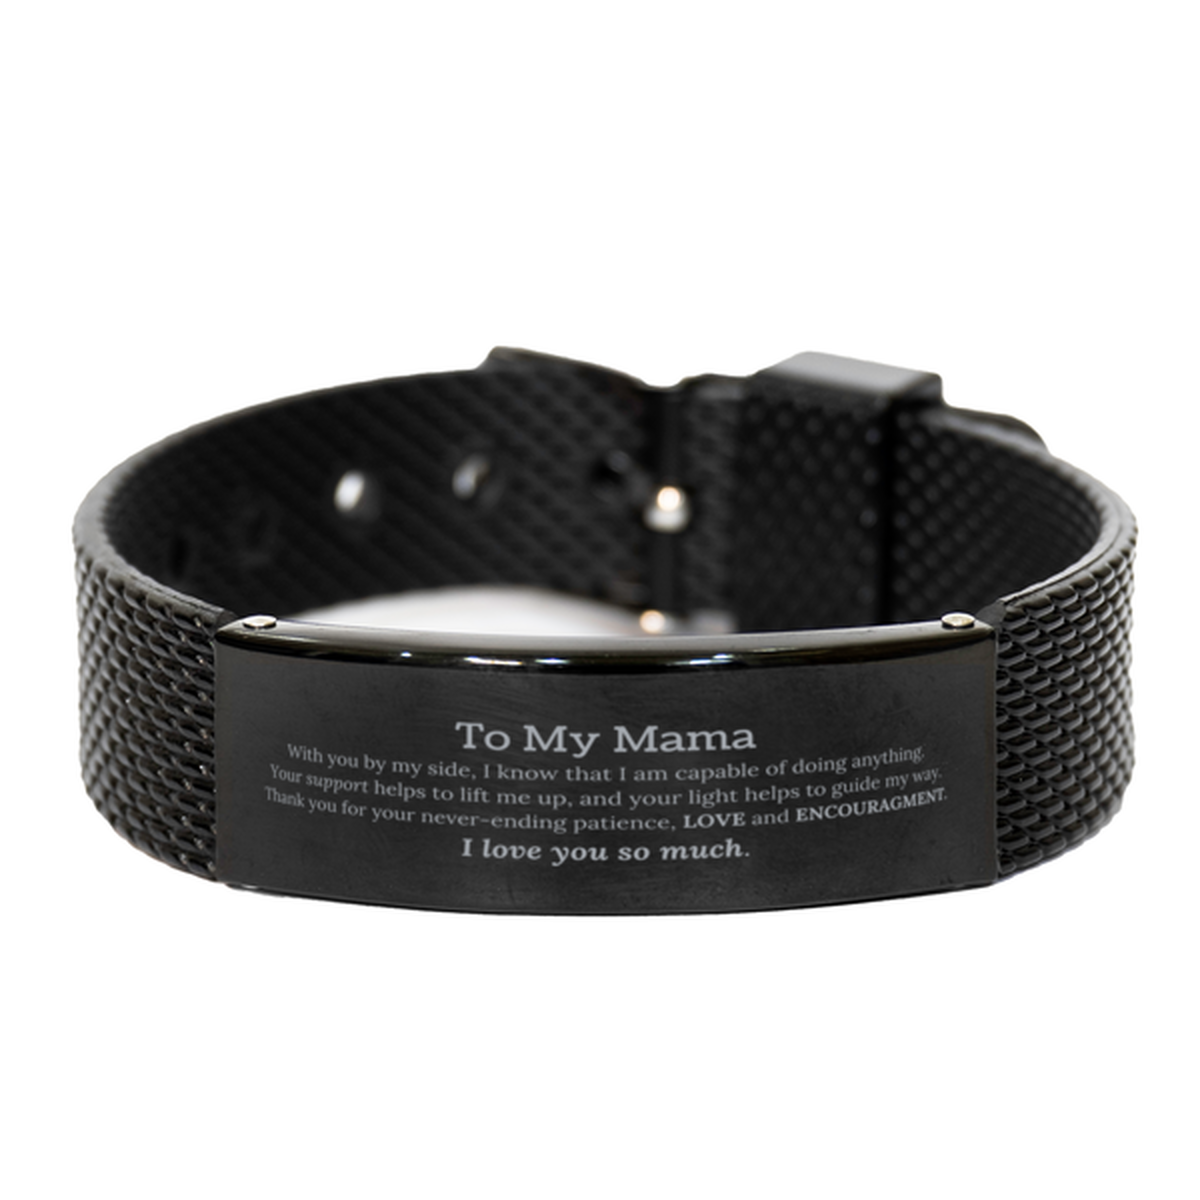 Appreciation Mama Black Shark Mesh Bracelet Gifts, To My Mama Birthday Christmas Wedding Keepsake Gifts for Mama With you by my side, I know that I am capable of doing anything. I love you so much